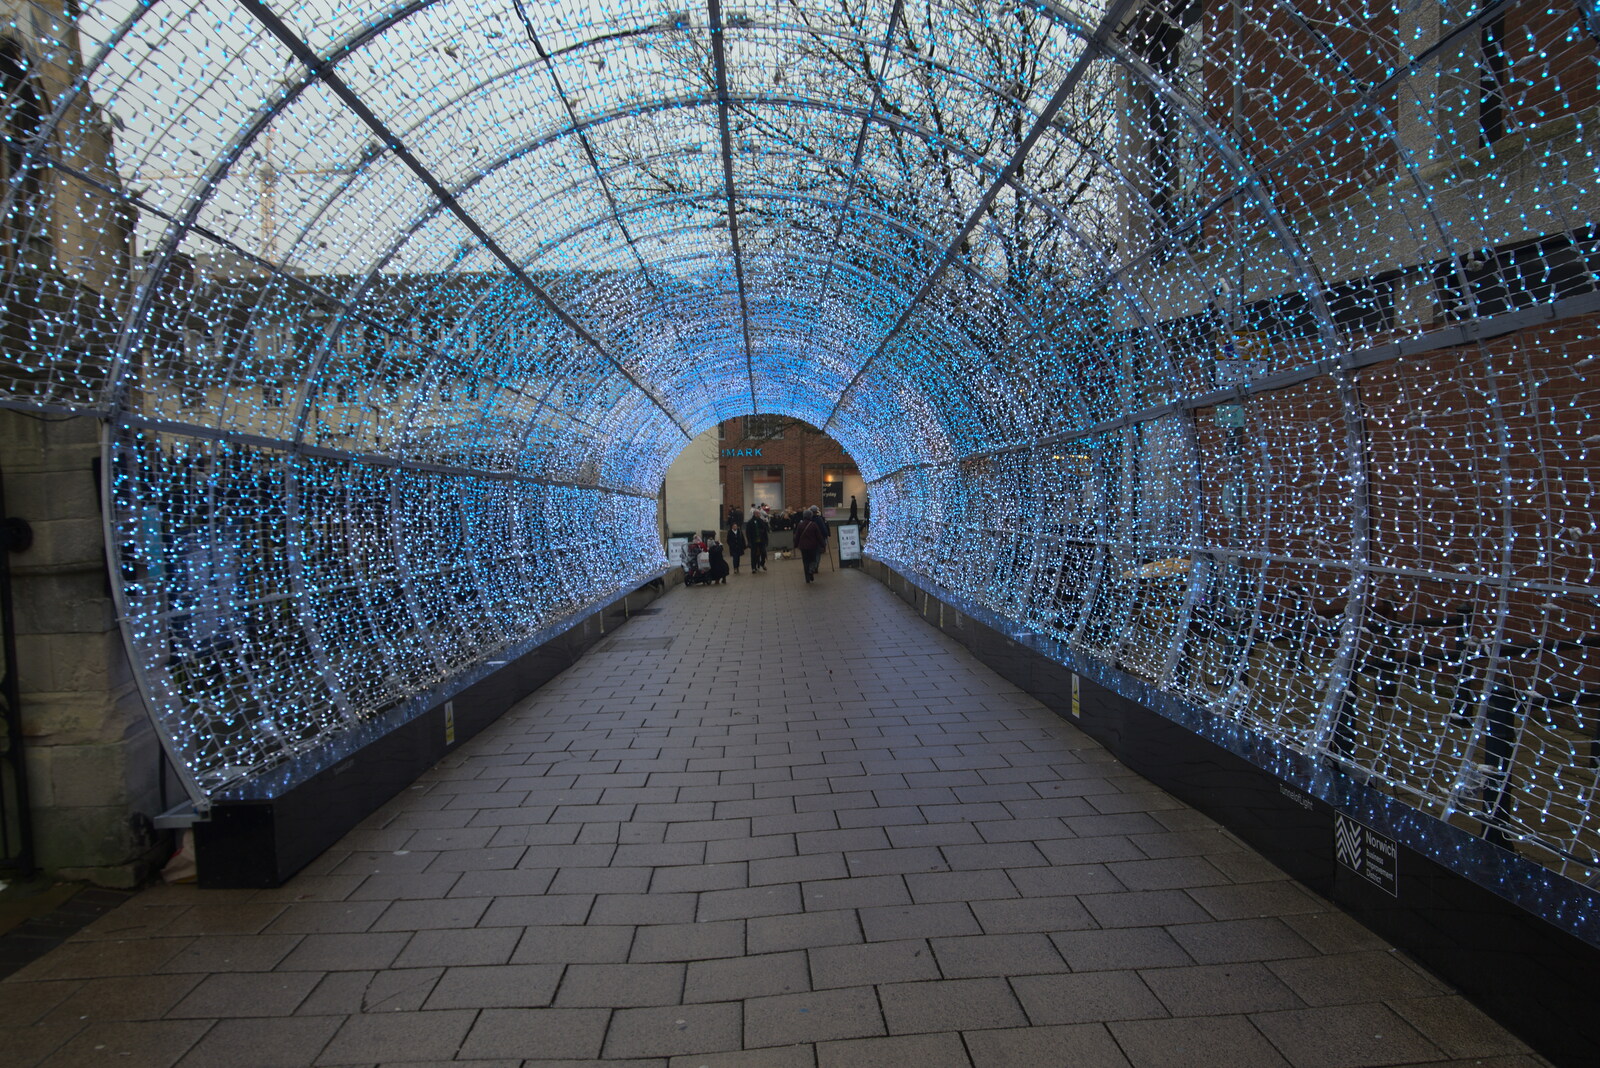 Once again through the light tunnel from Scooters and a Bit of Christmas Shopping, Eye and Norwich, Norfolk - 23rd December 2021